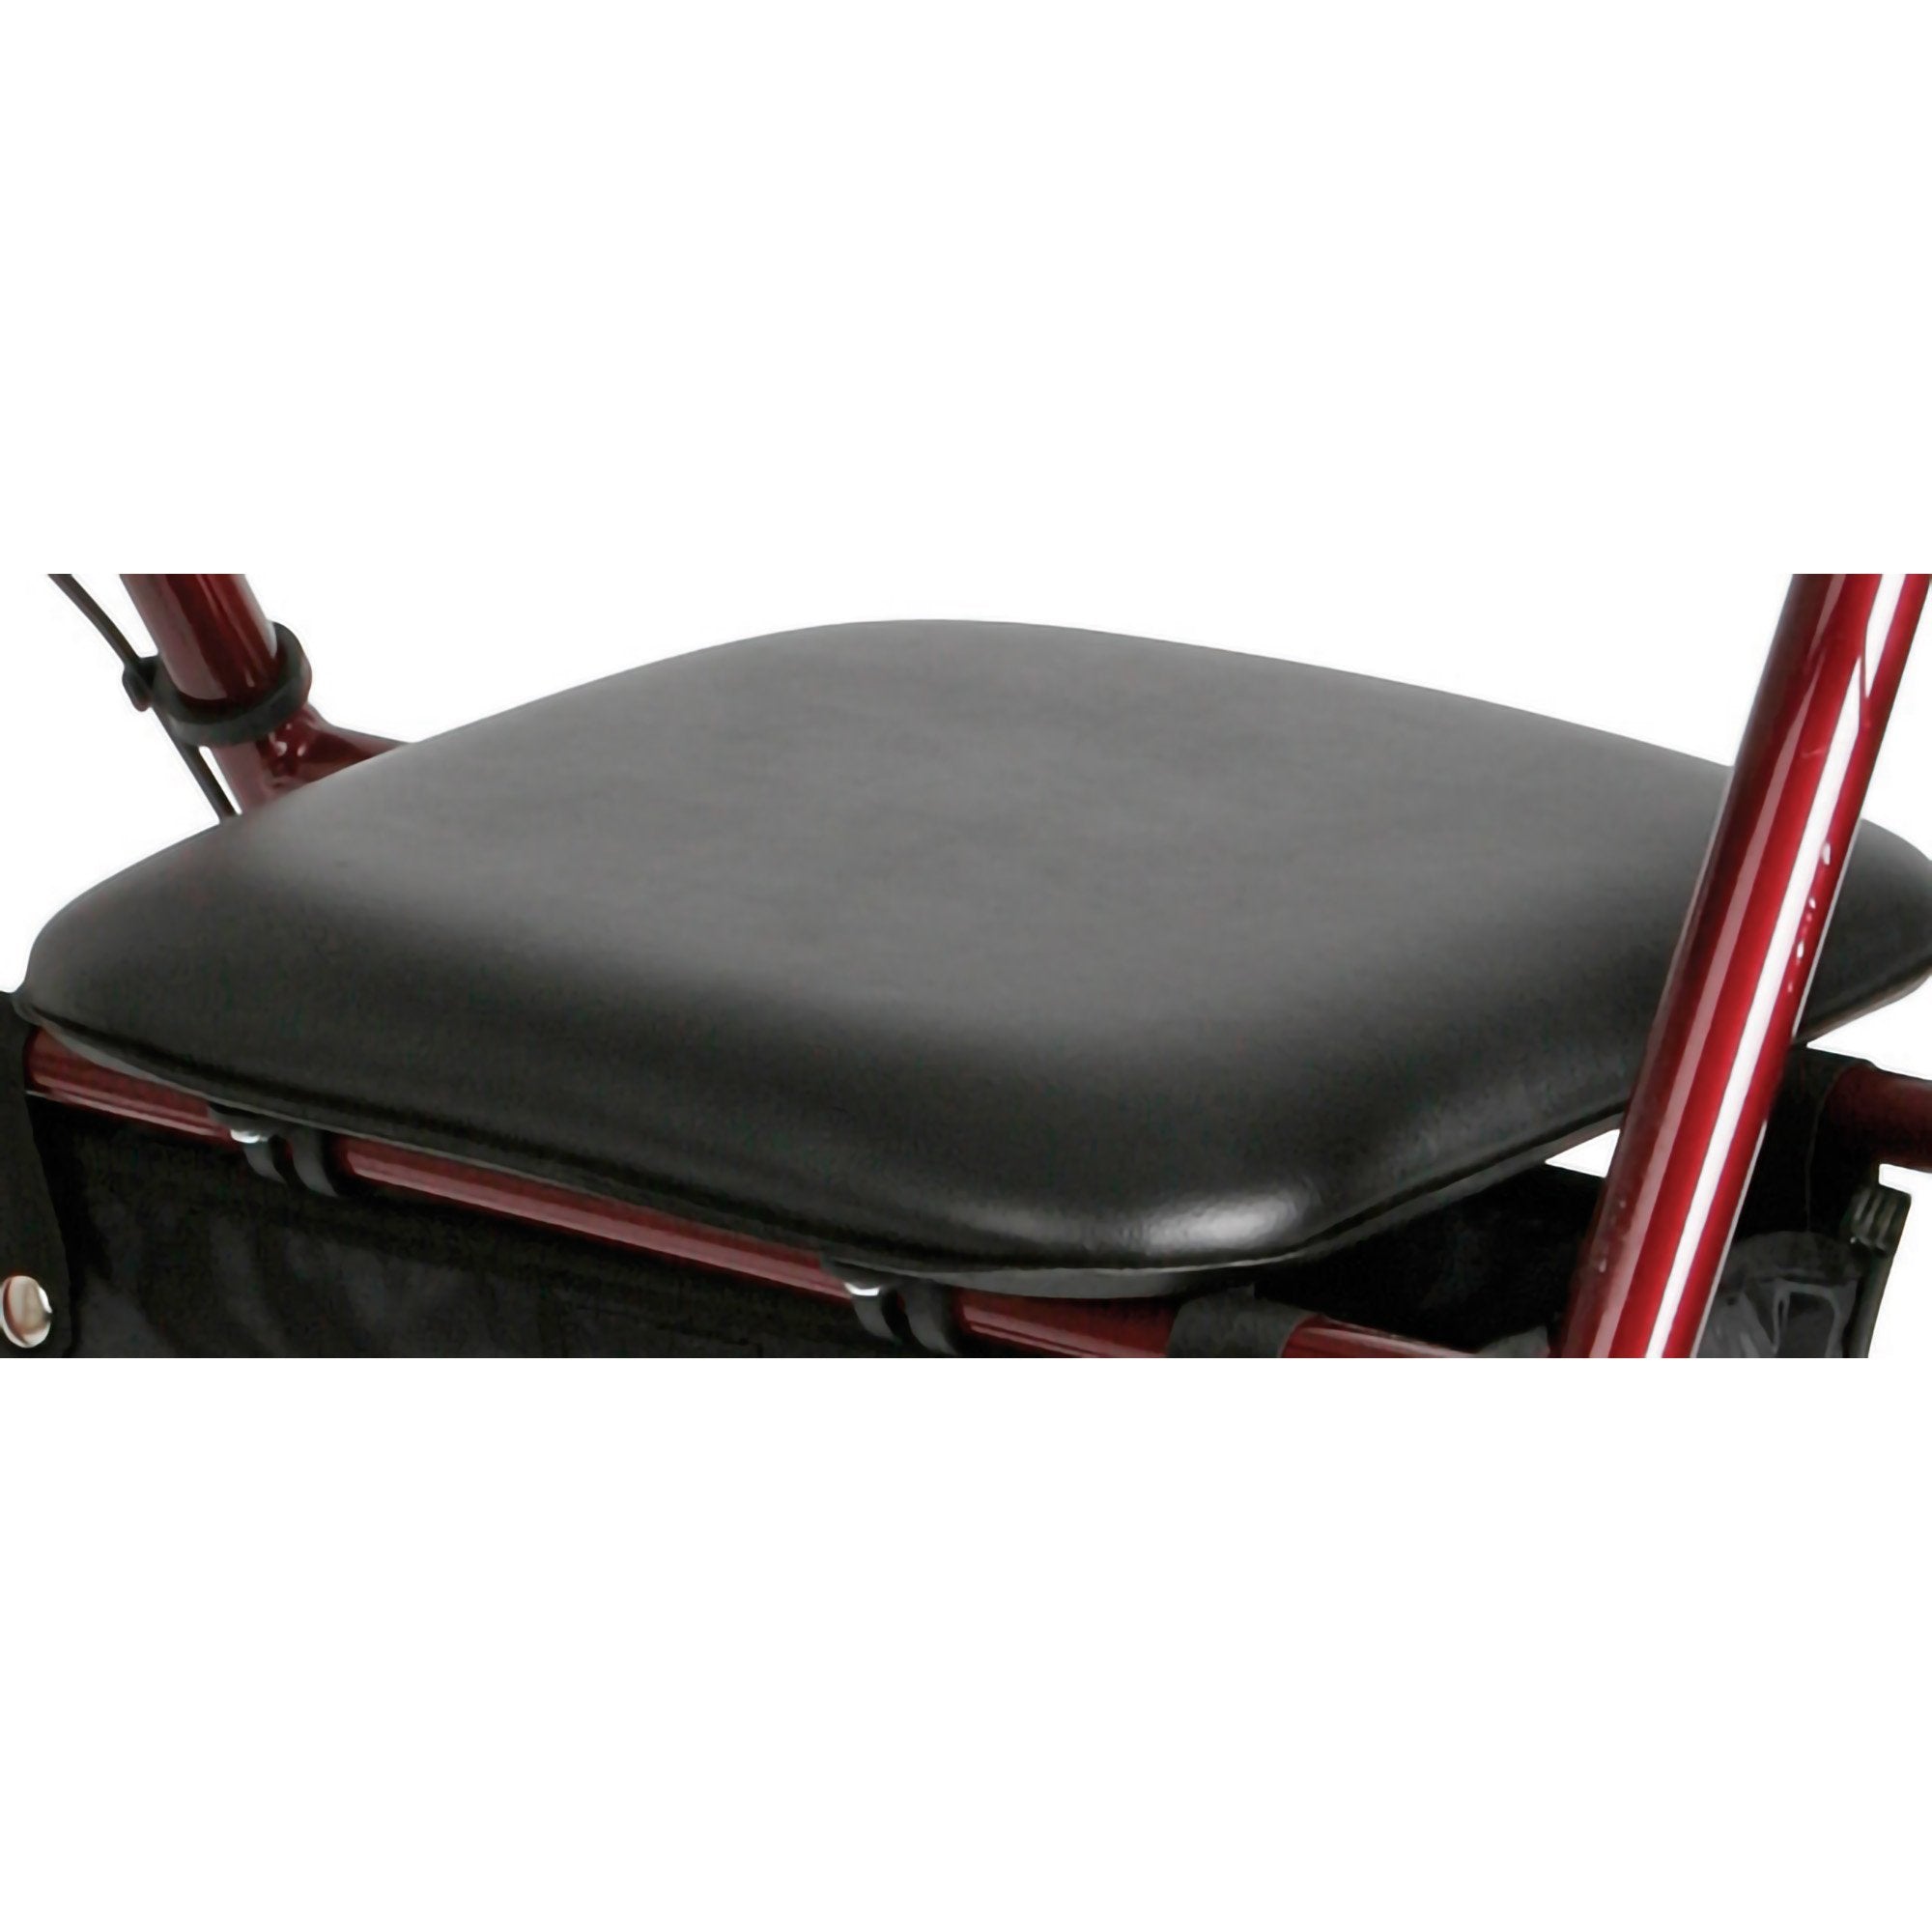 Rollator Seat Assembly